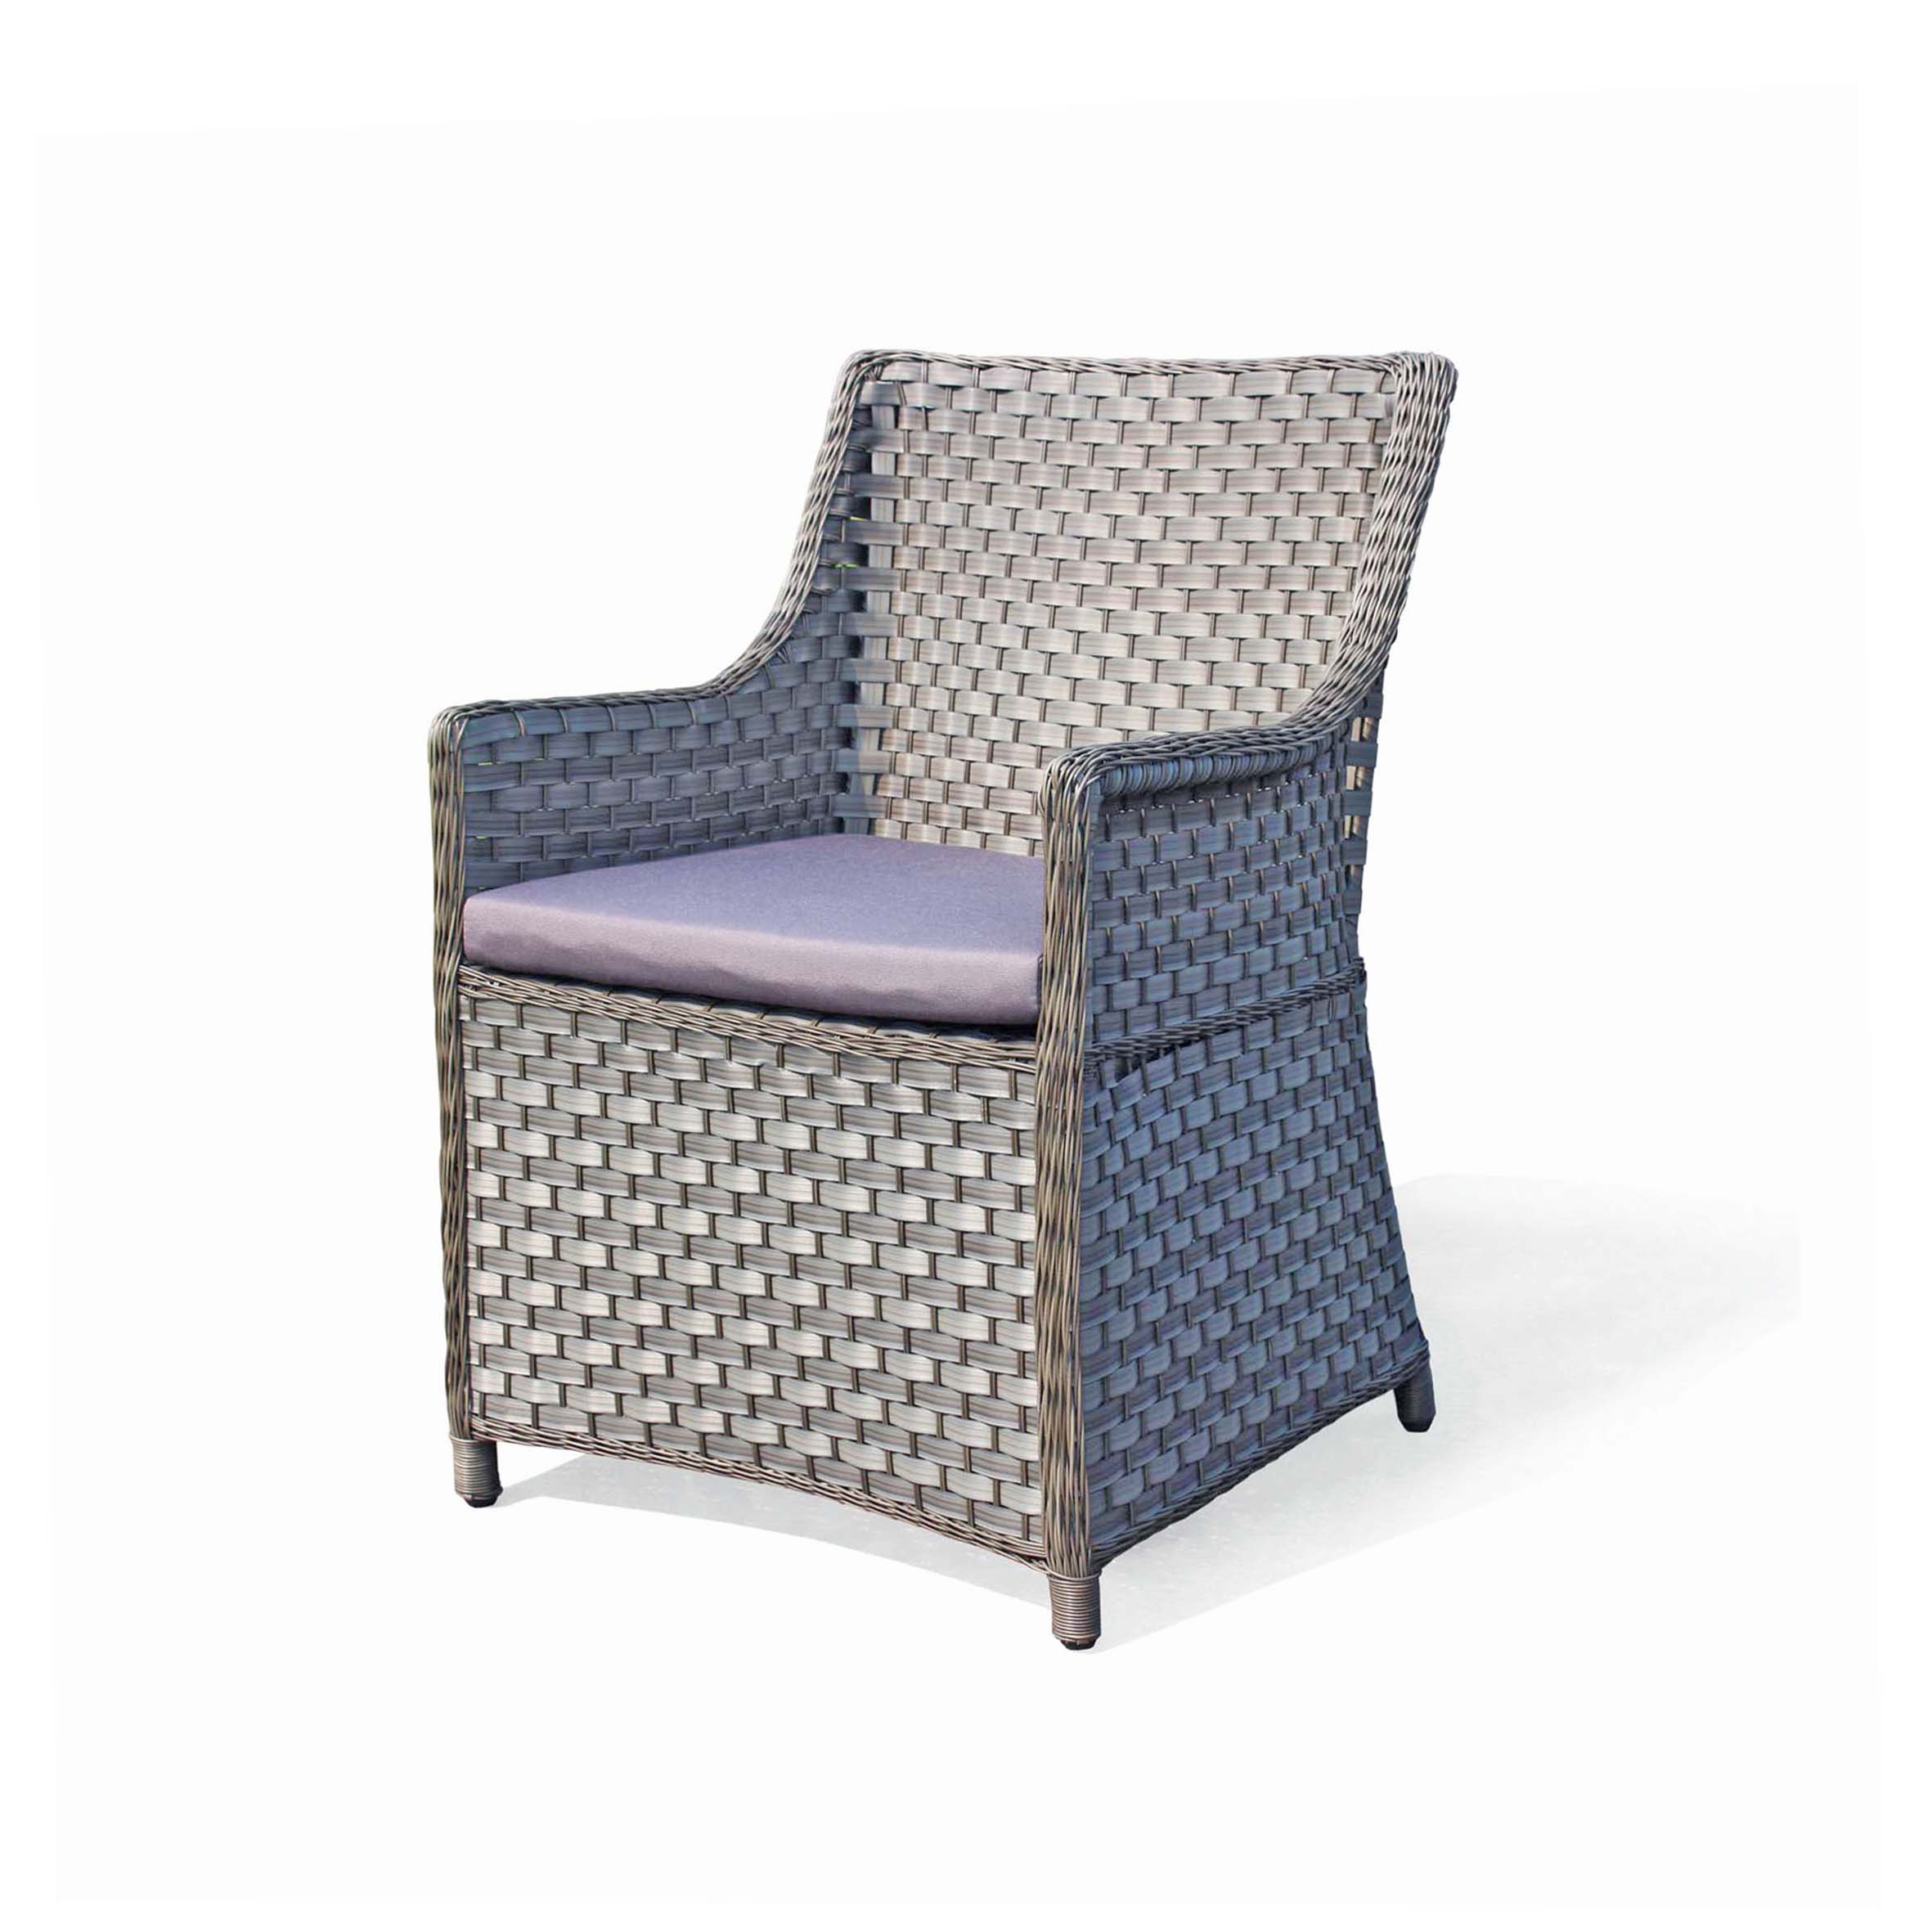 Spring rattan dining chair S4